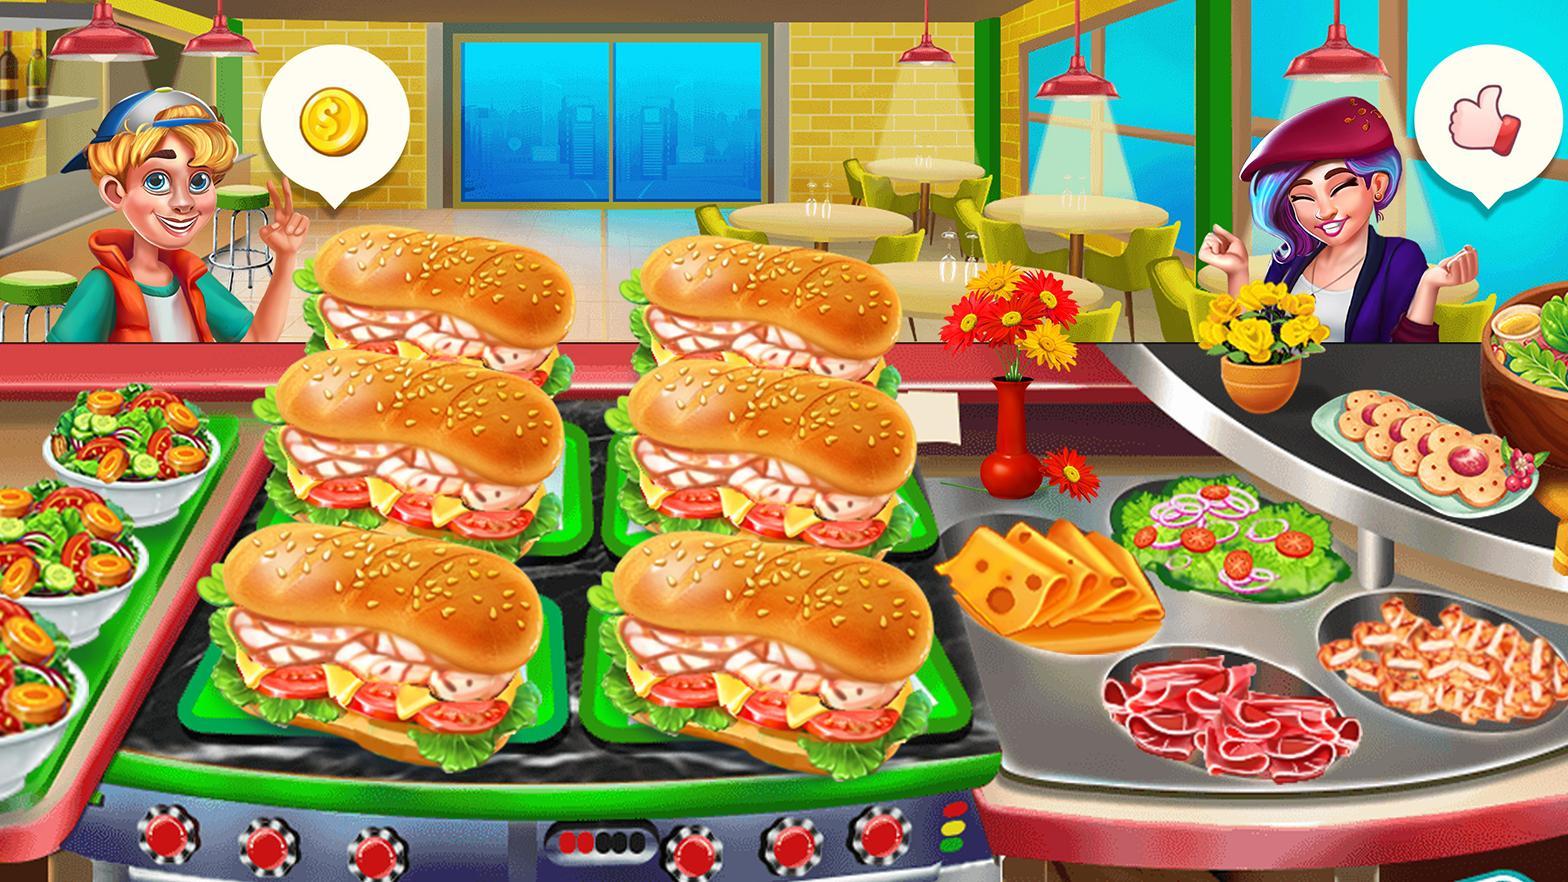 Tasty Cooking Restaurant Chef Cooking Games For Android Apk Download